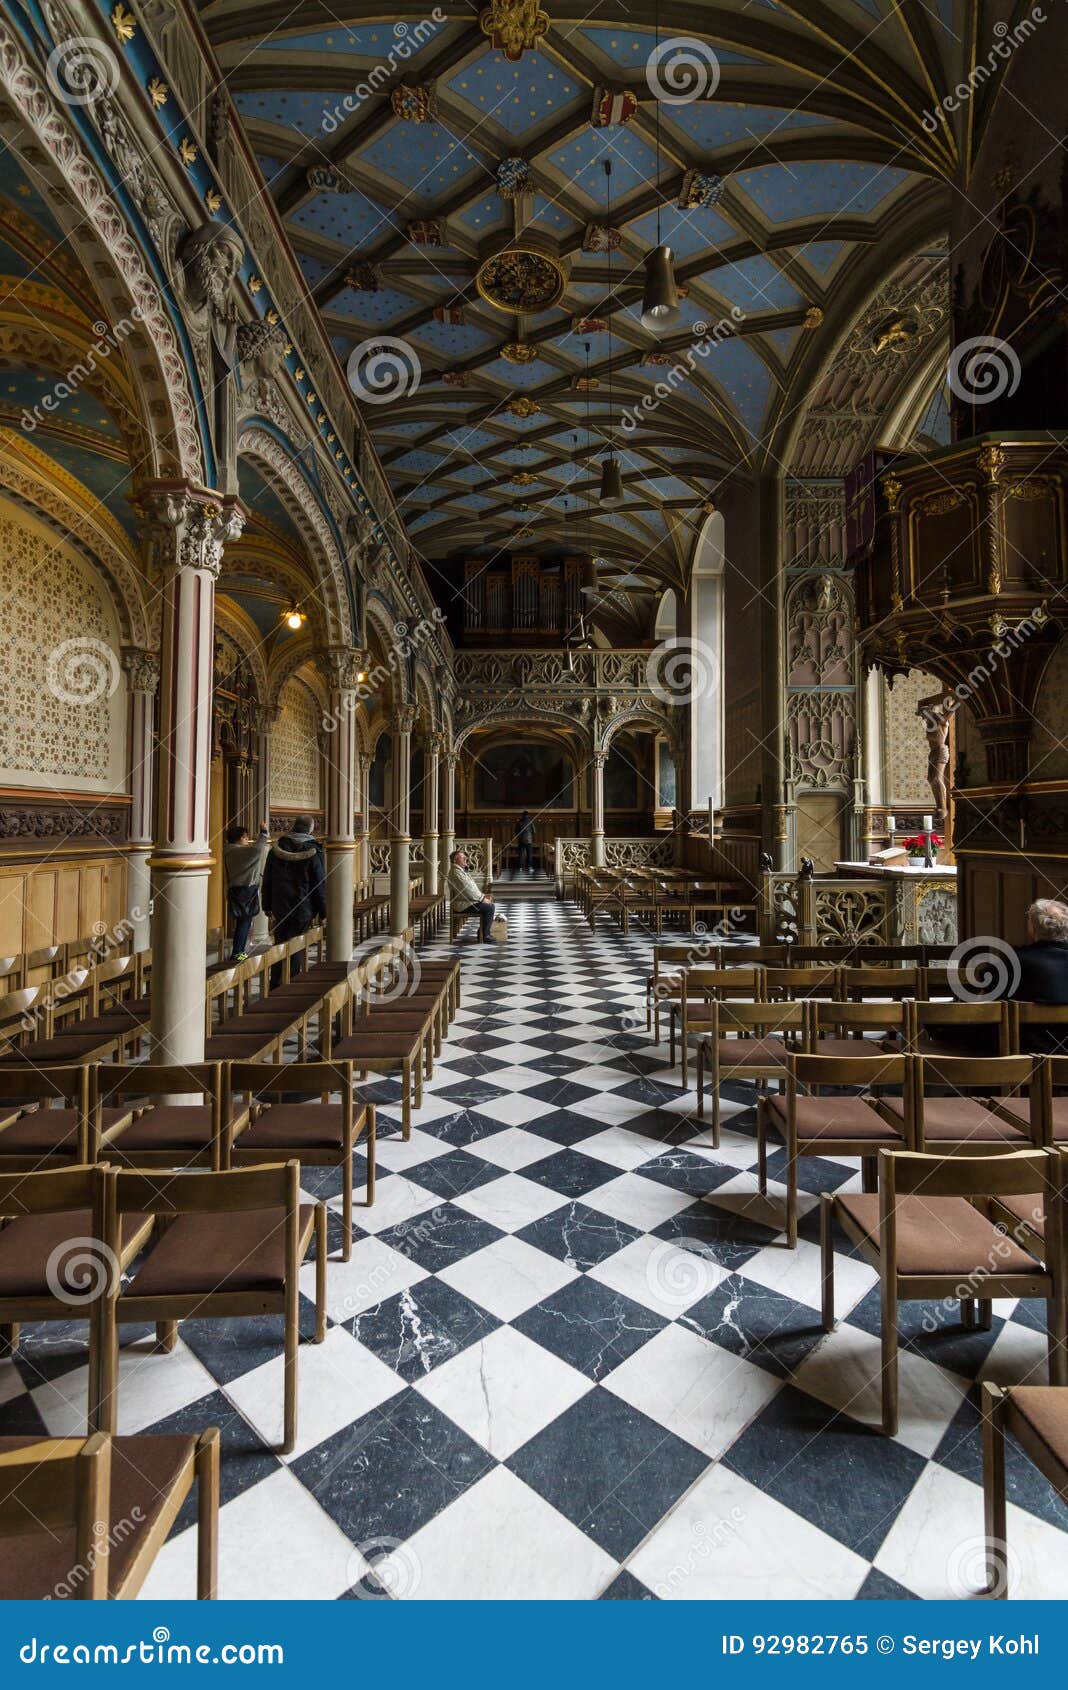 Interior Of Castle Church Of The Old Castle Editorial Image Image Of Inspiration City